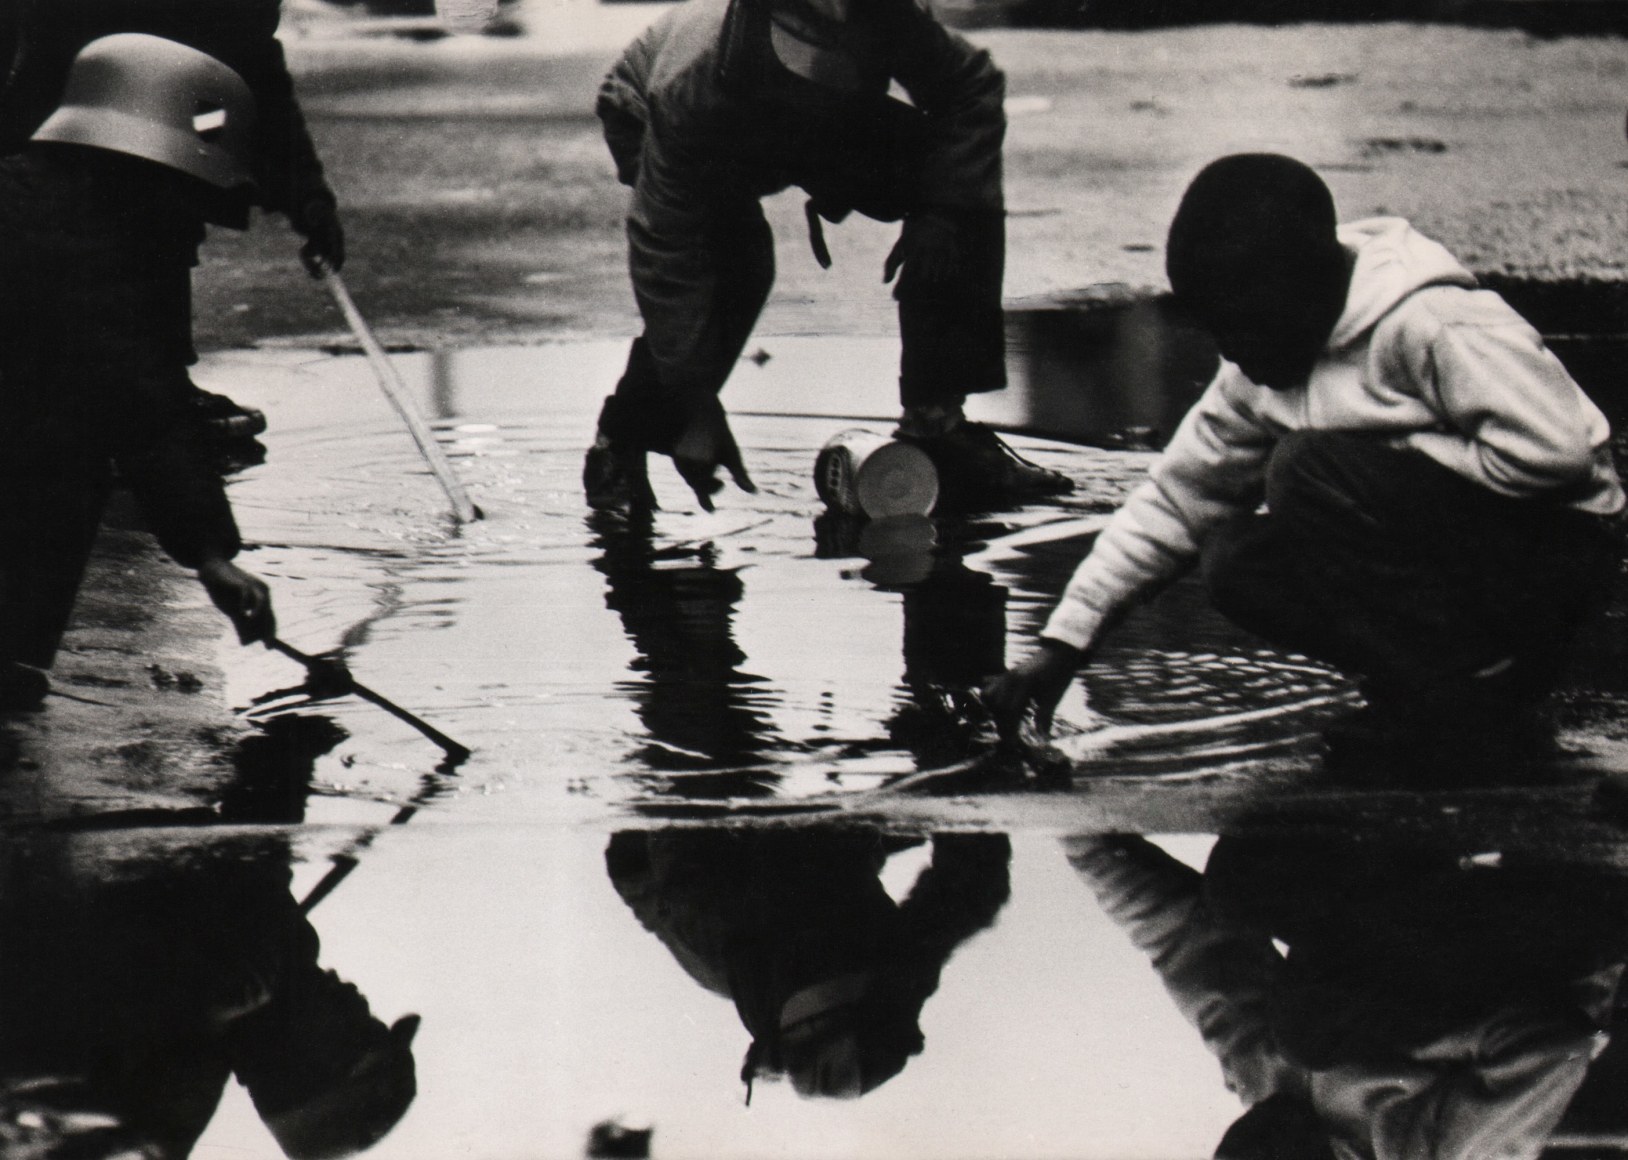 39. Beuford Smith, Reflection #1, Harlem, ​1965. Figures crouched, reaching into a large puddle on the street.